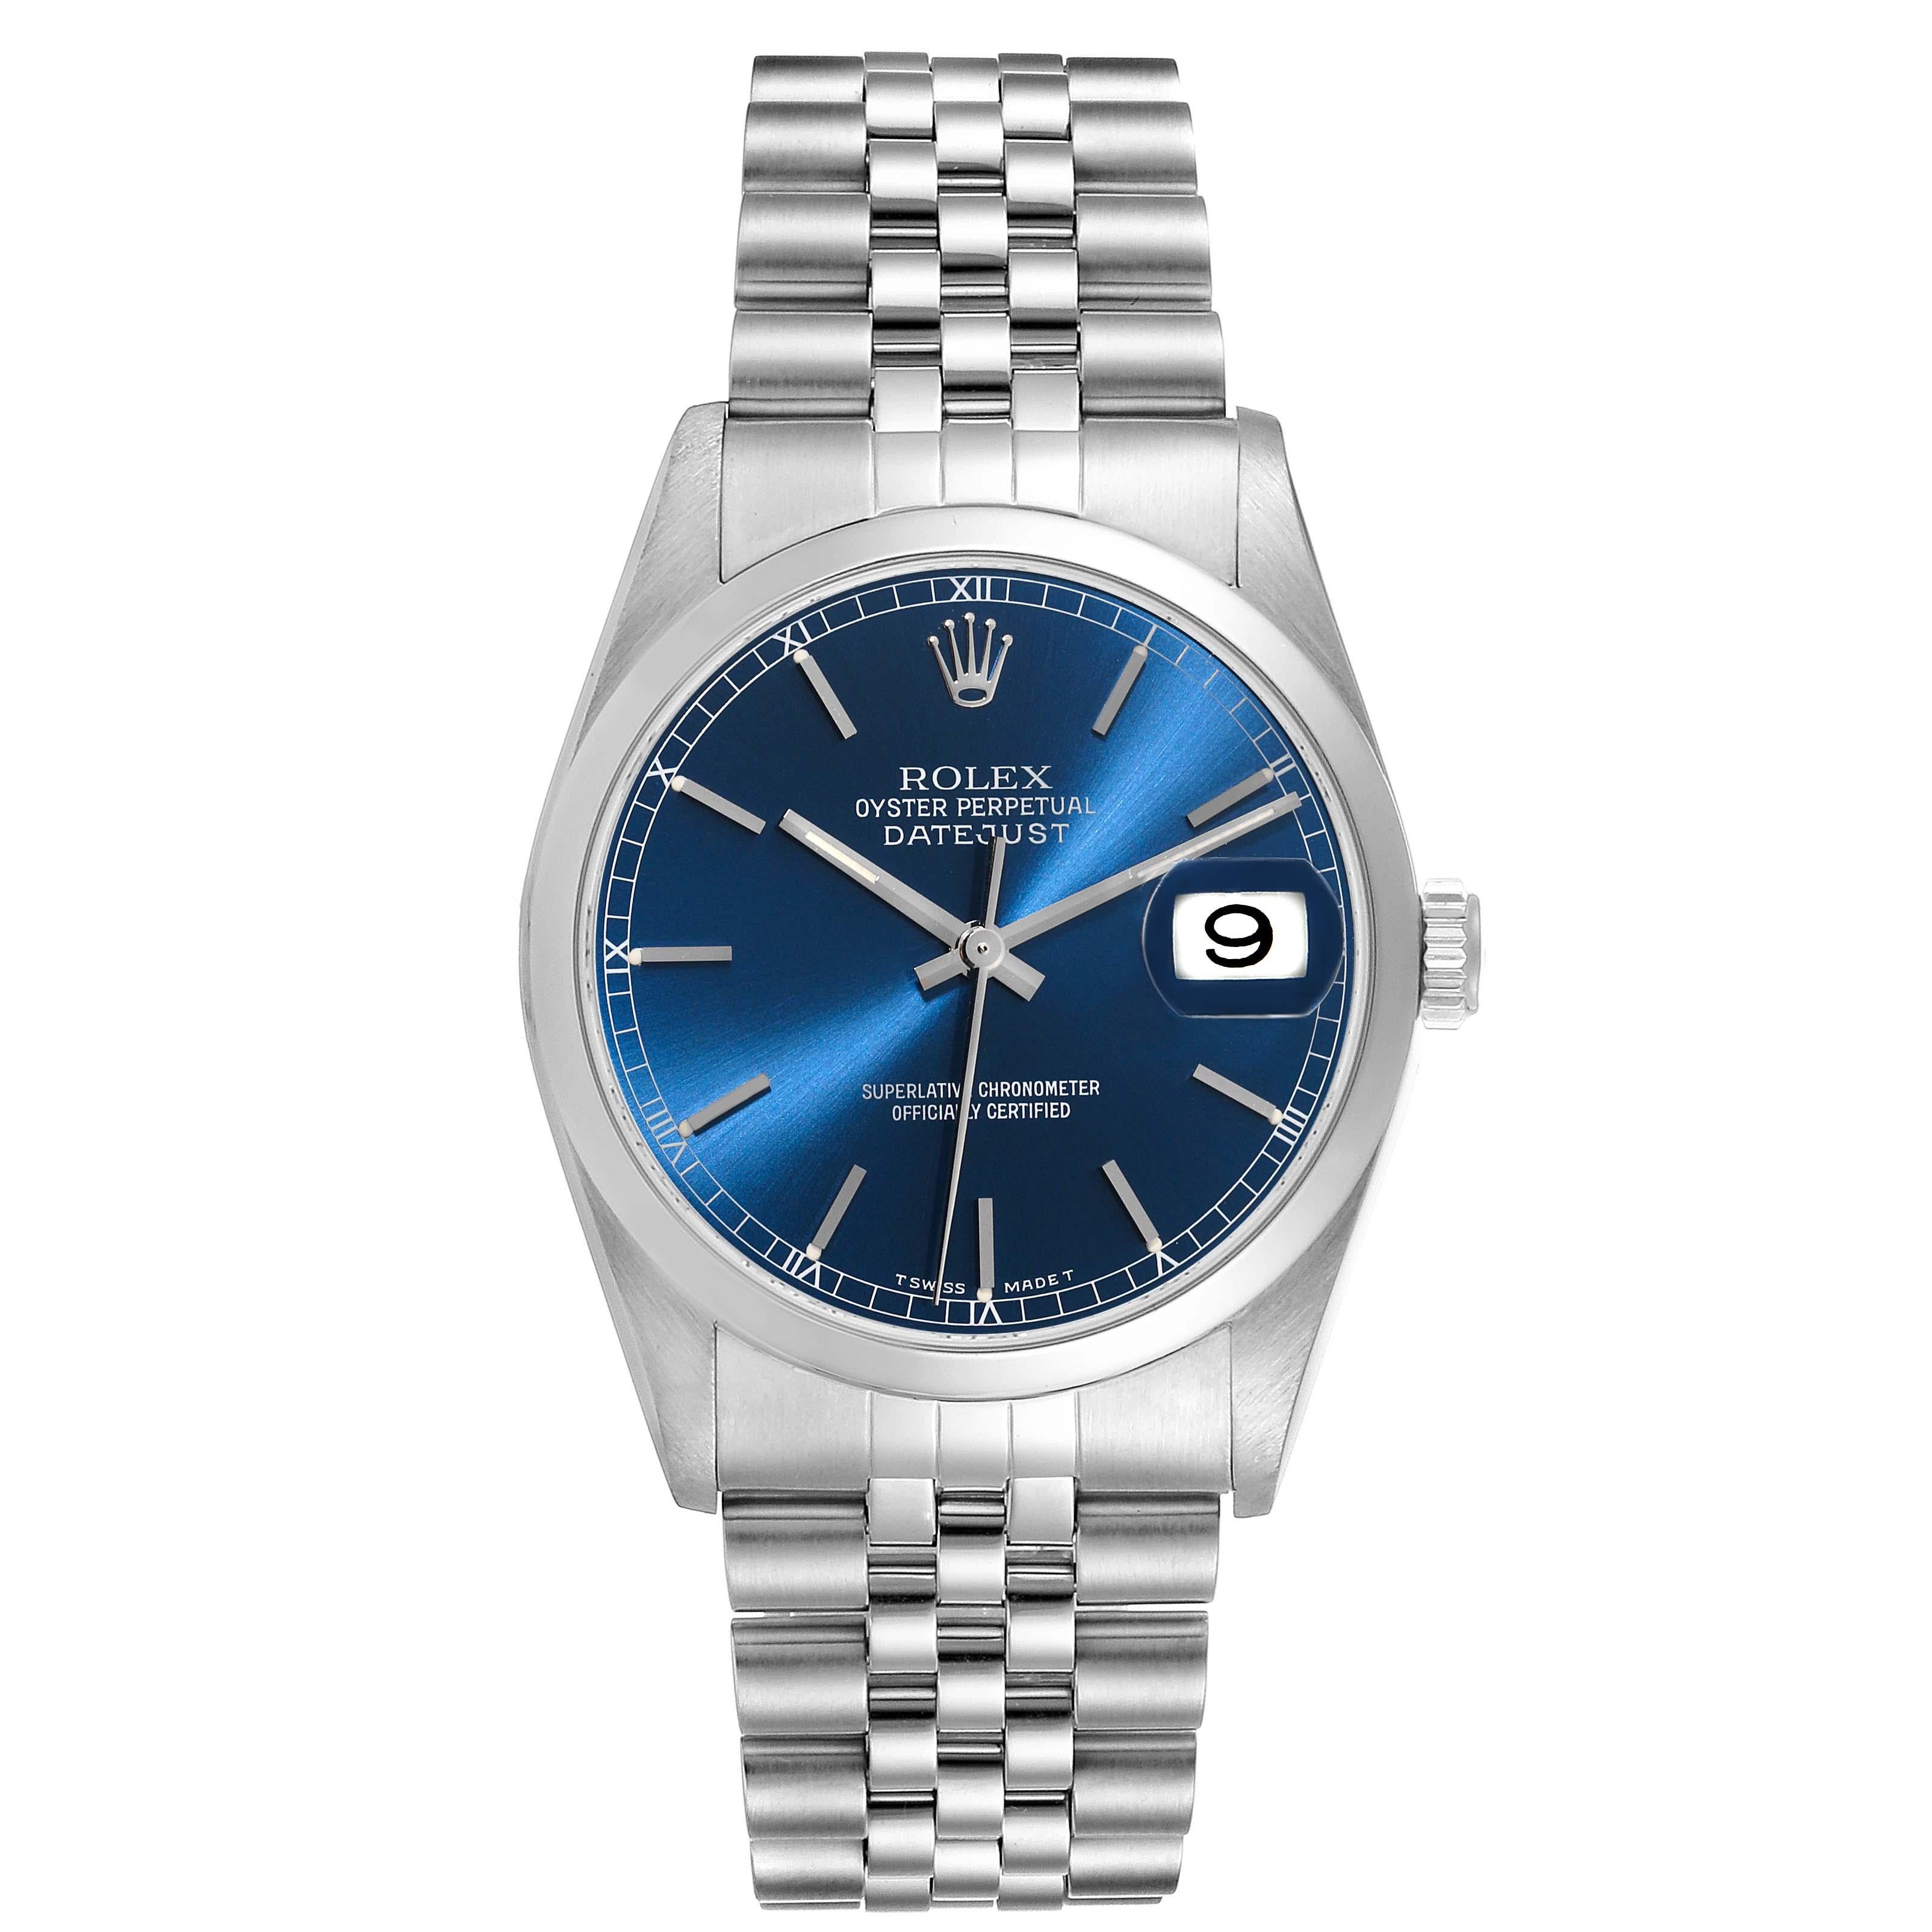 Rolex Datejust 36mm Blue Dial Smooth Bezel Steel Mens Watch 16200 Box Papers. Officially certified chronometer automatic self-winding movement with quickset date function. Stainless steel oyster case 36mm in diameter. Rolex logo on the crown.